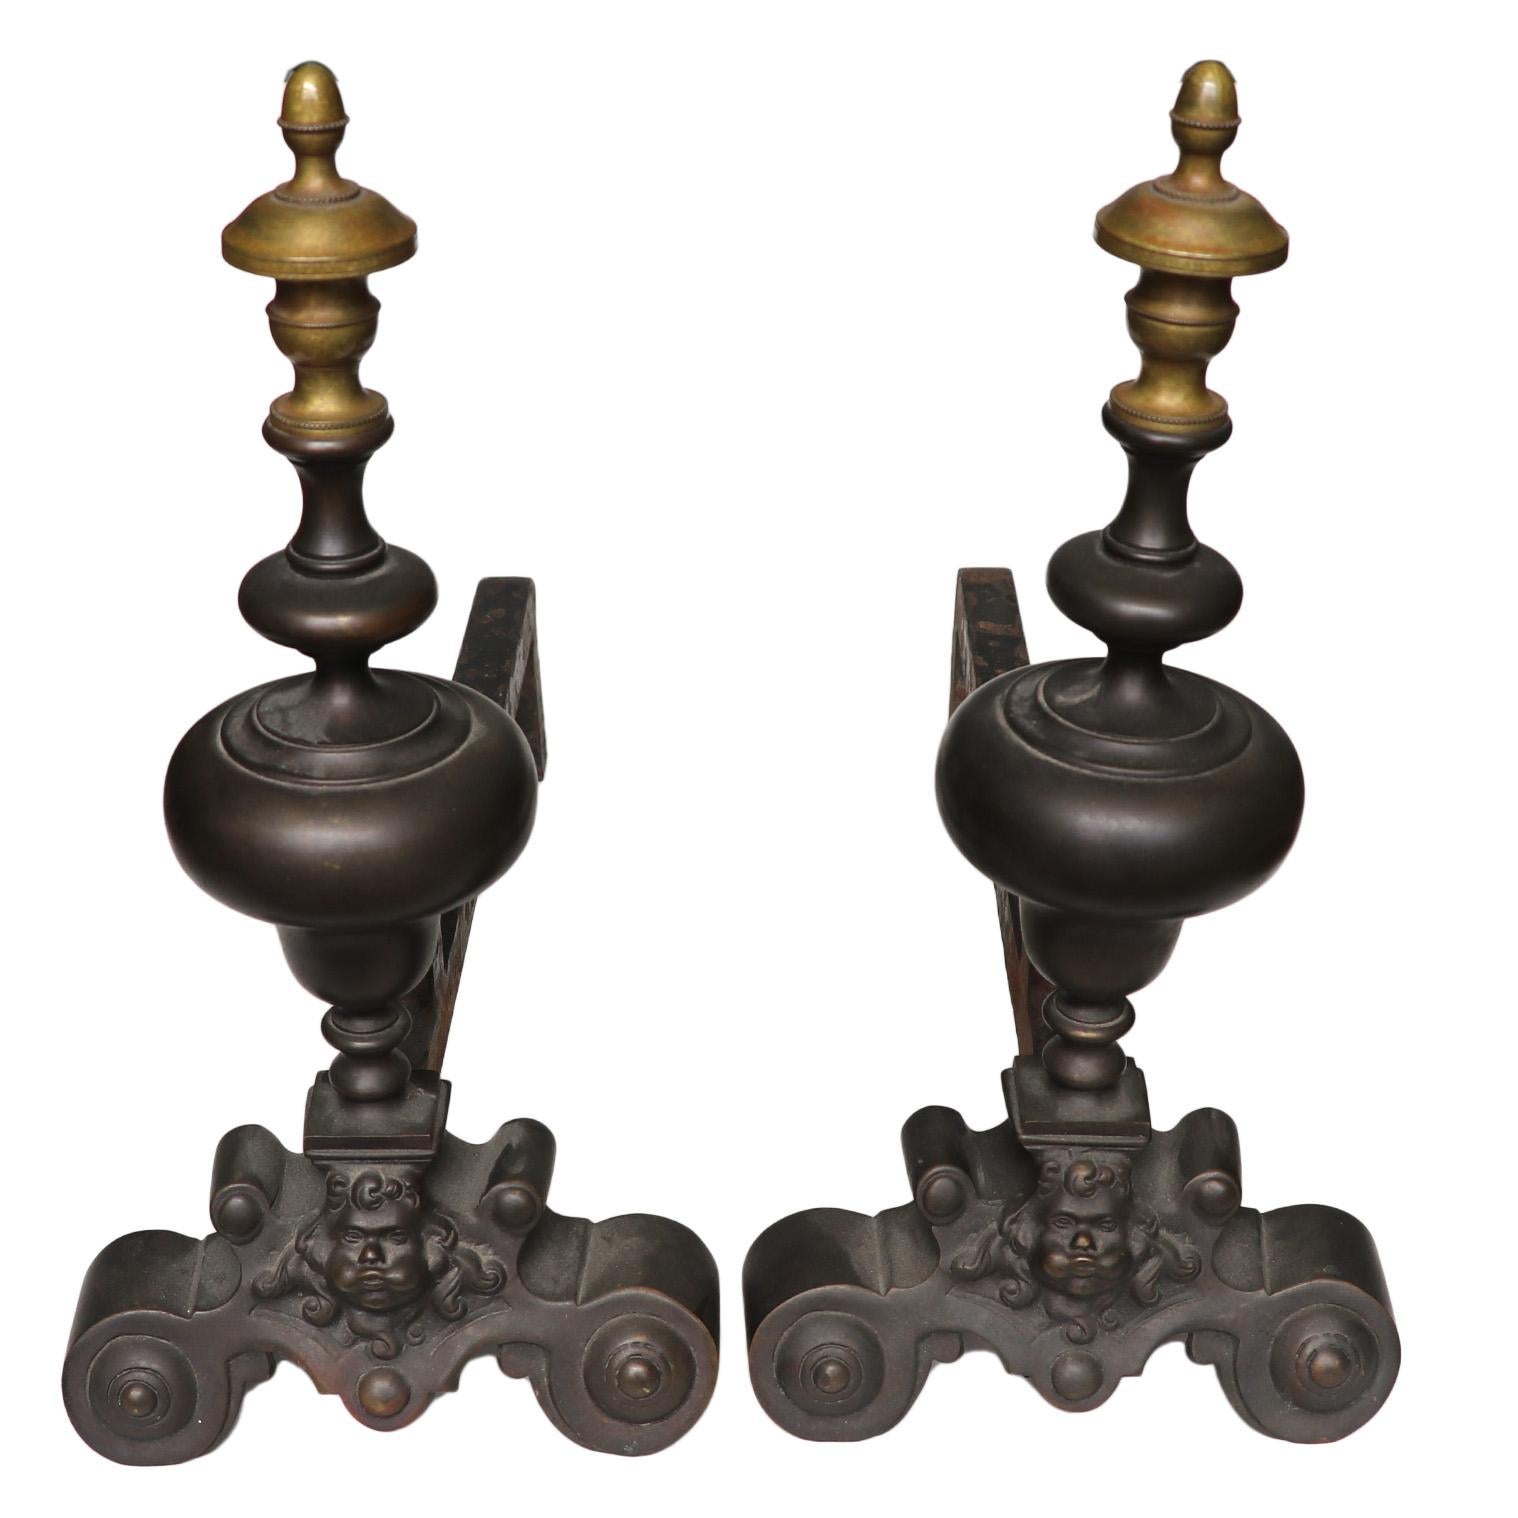 A pair of French cast iron andirons. Each: 7.25